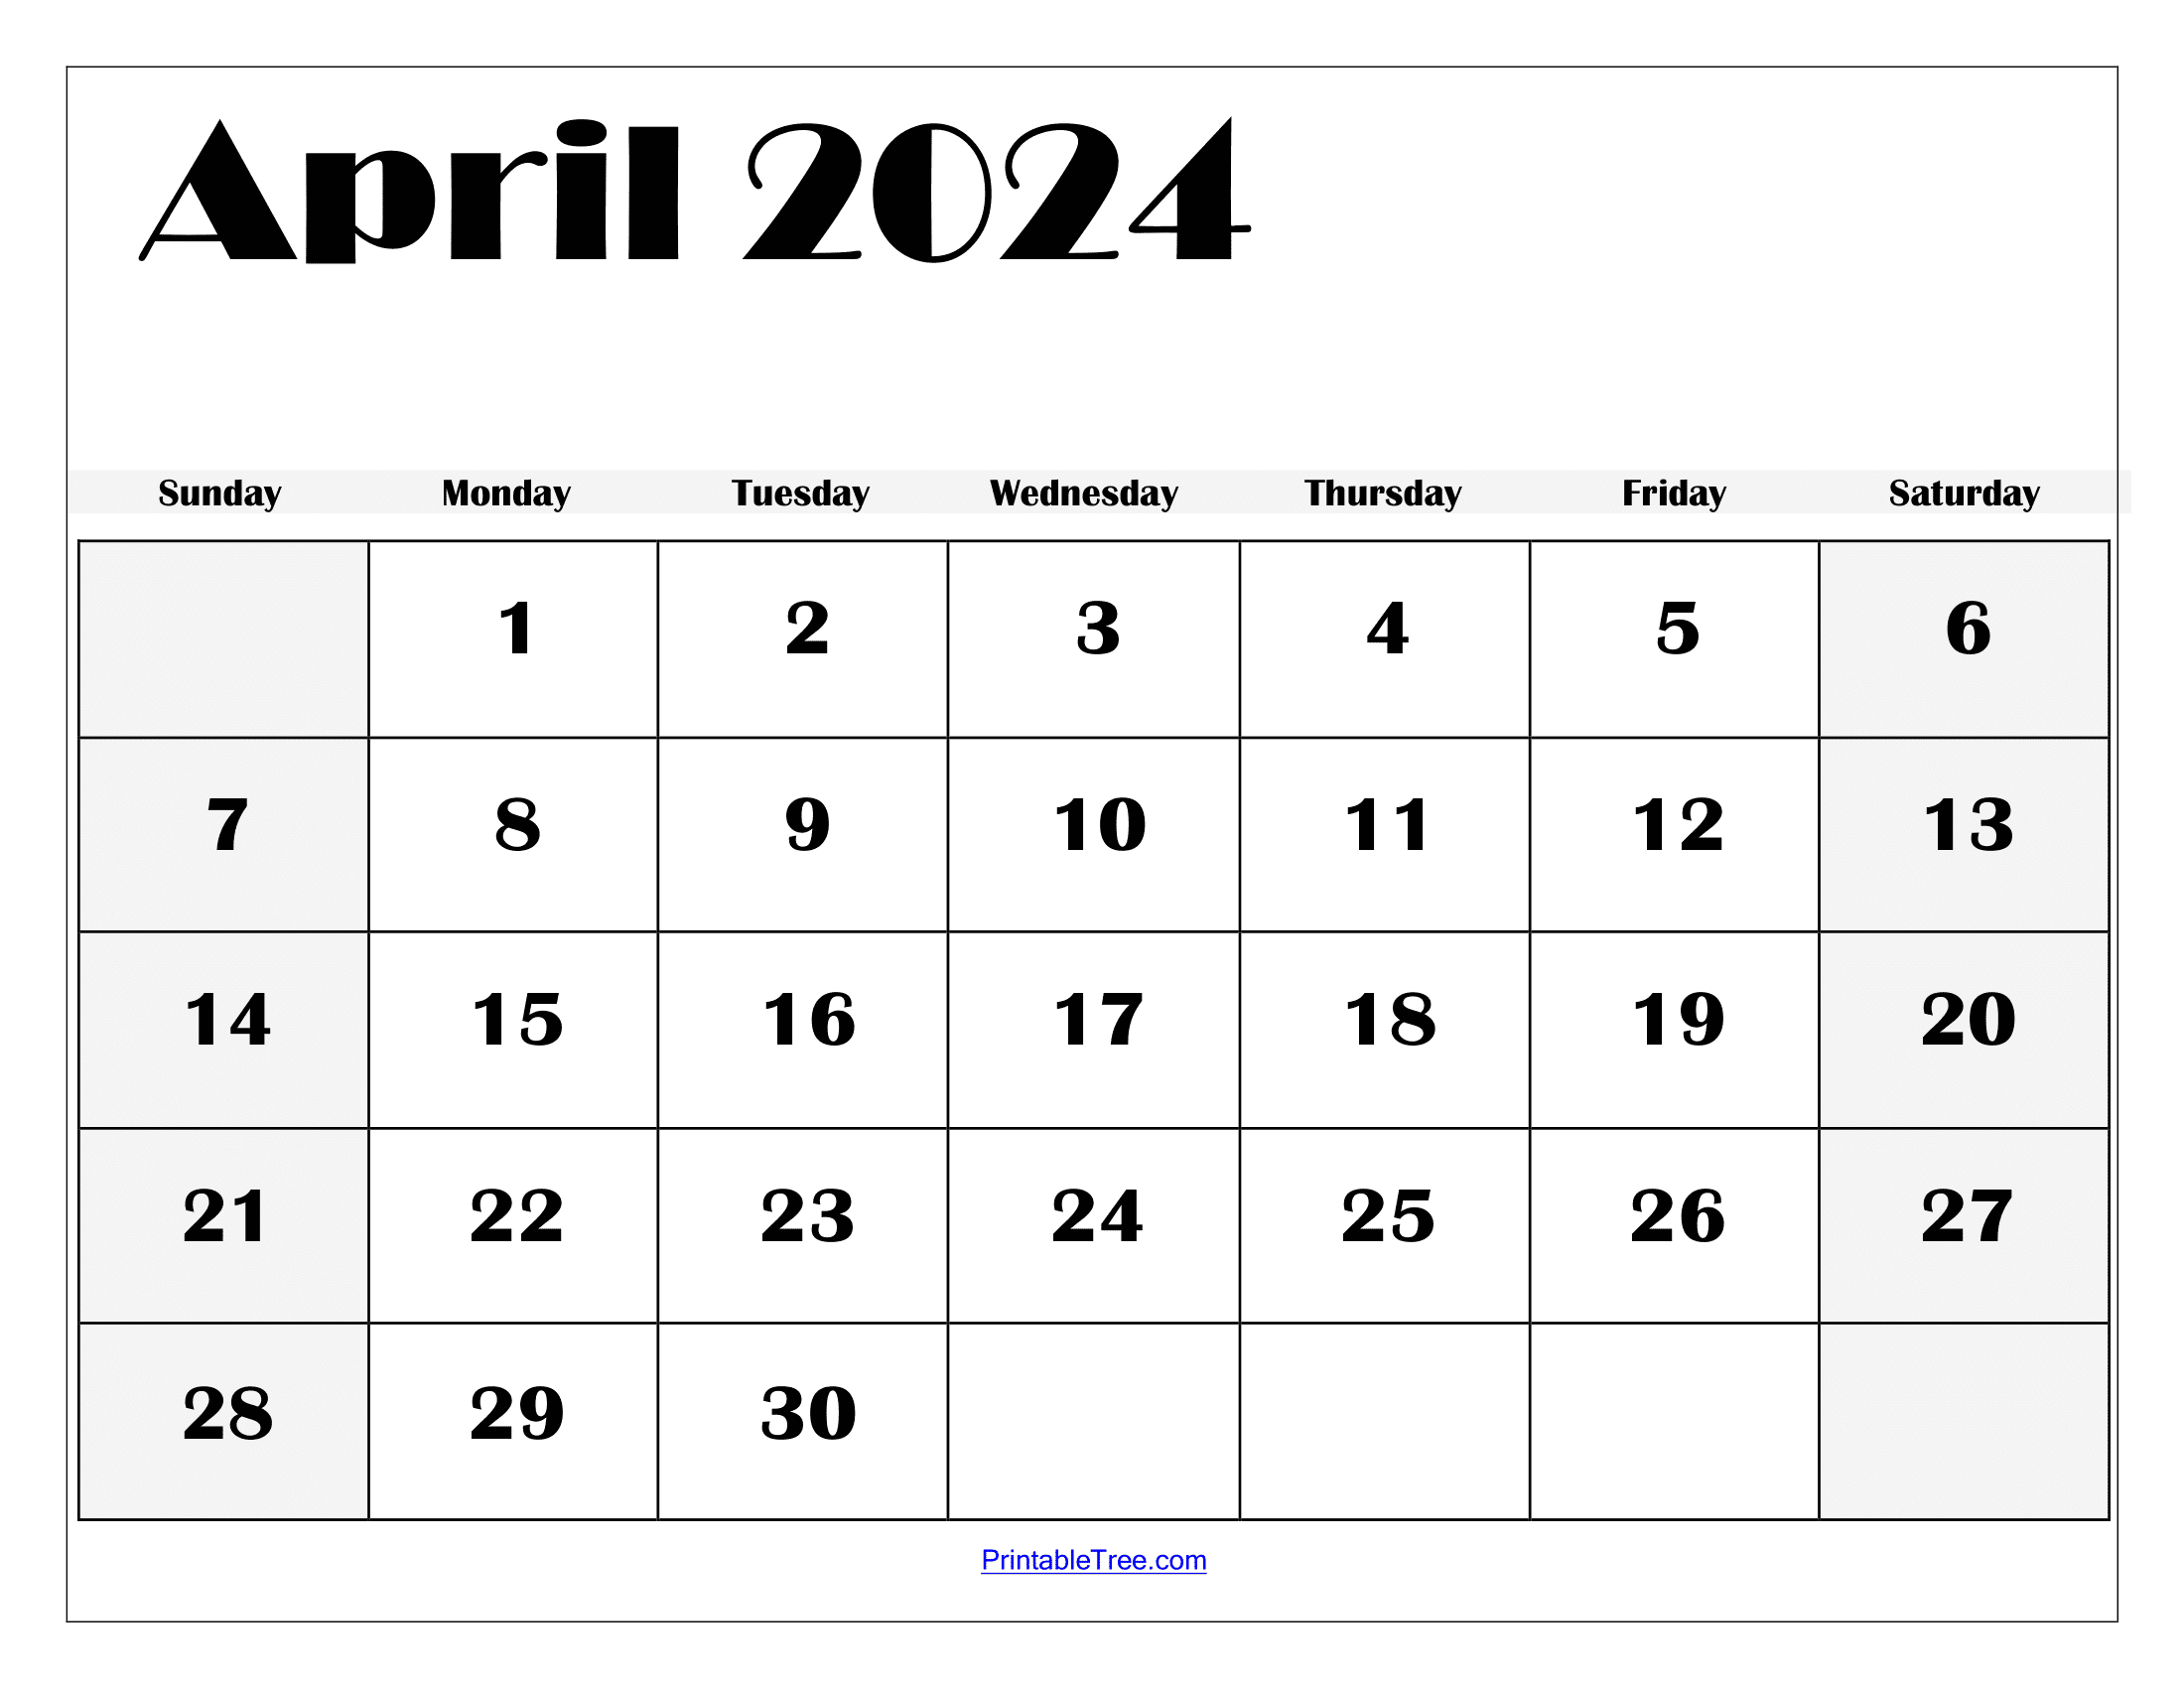 Blank April 2024 Calendar Printable Pdf Template With Holidays | Printable Calendar 2024 South Africa Free Download